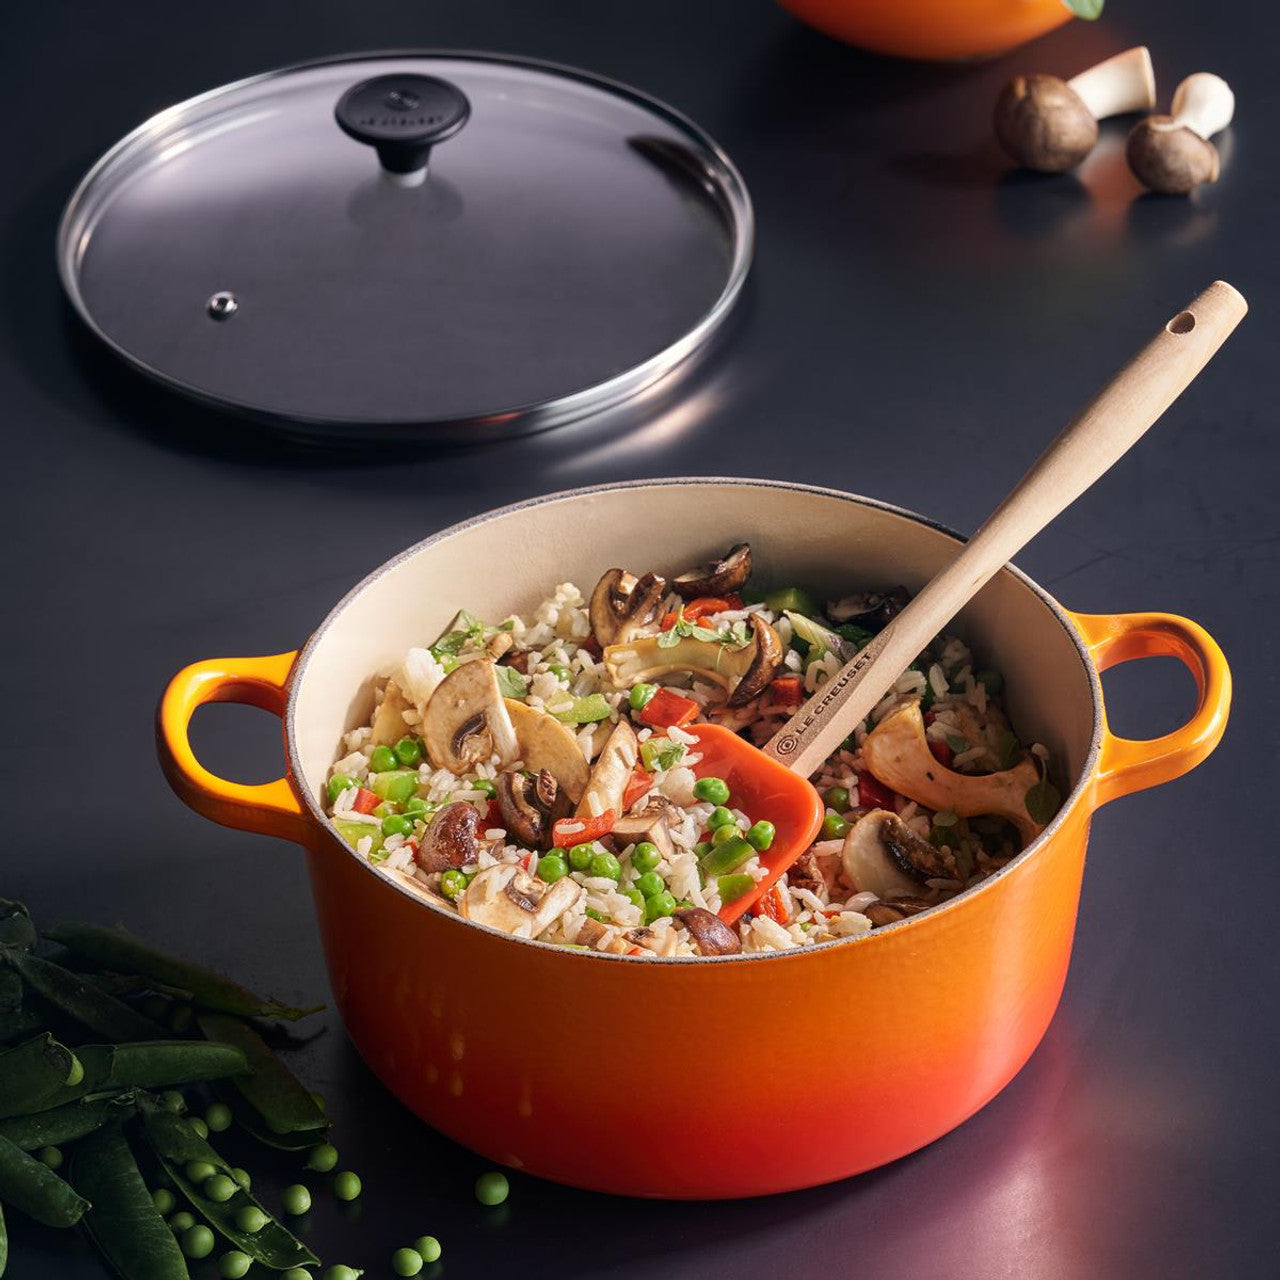 Le Creuset Cast Iron 22cm Round Casserole with Glass Lid in Volcanic